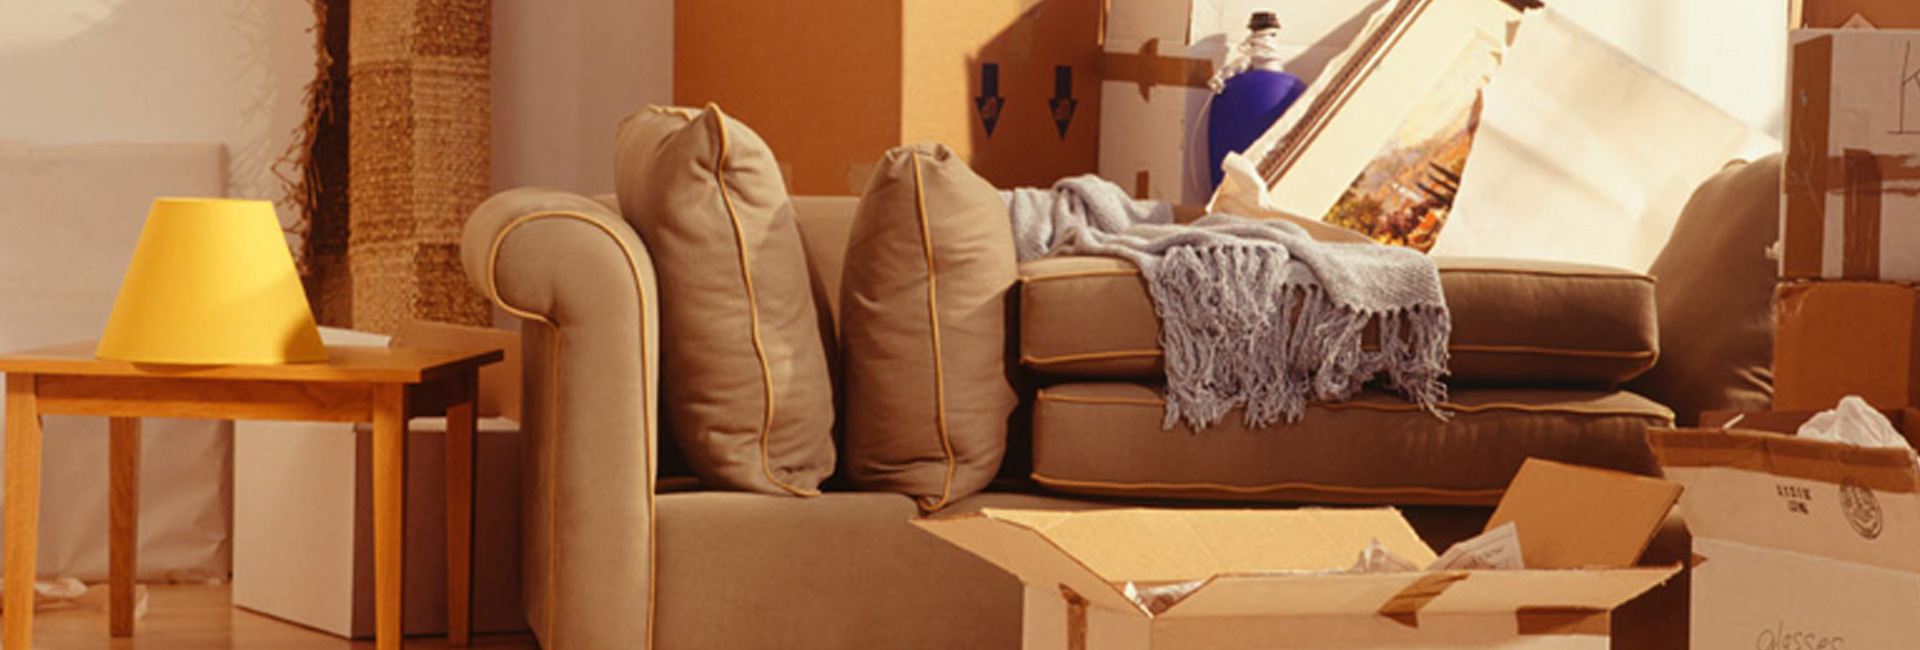 Movers and Packers - Your Relocation Guide